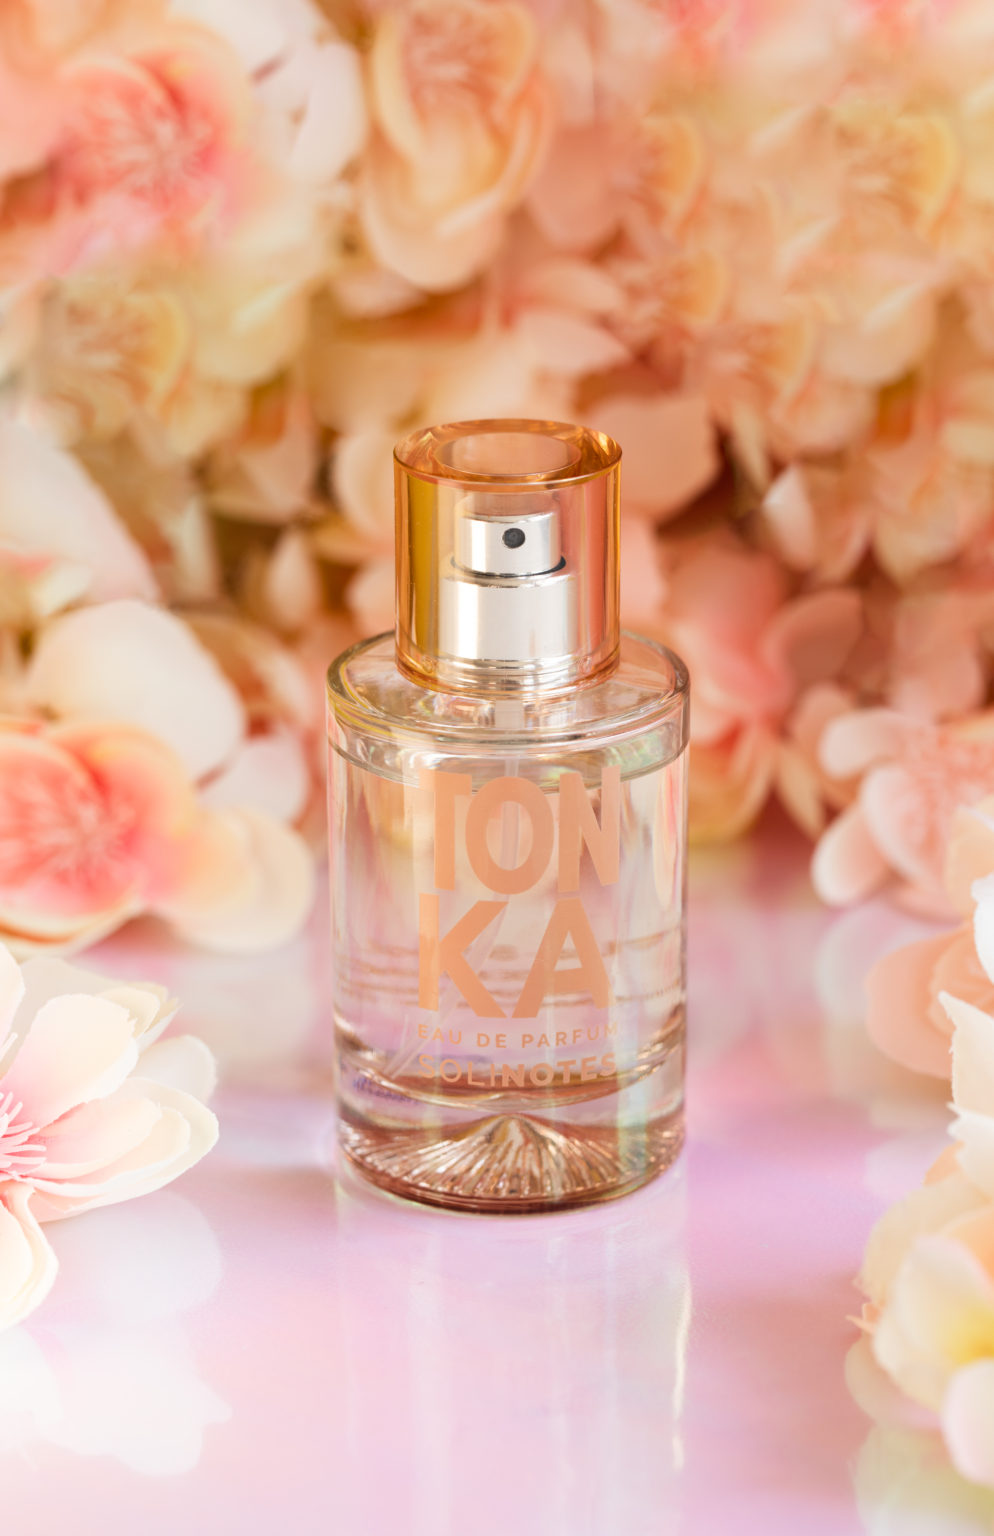 Image of Tonka perfume. Flowers are in the background.